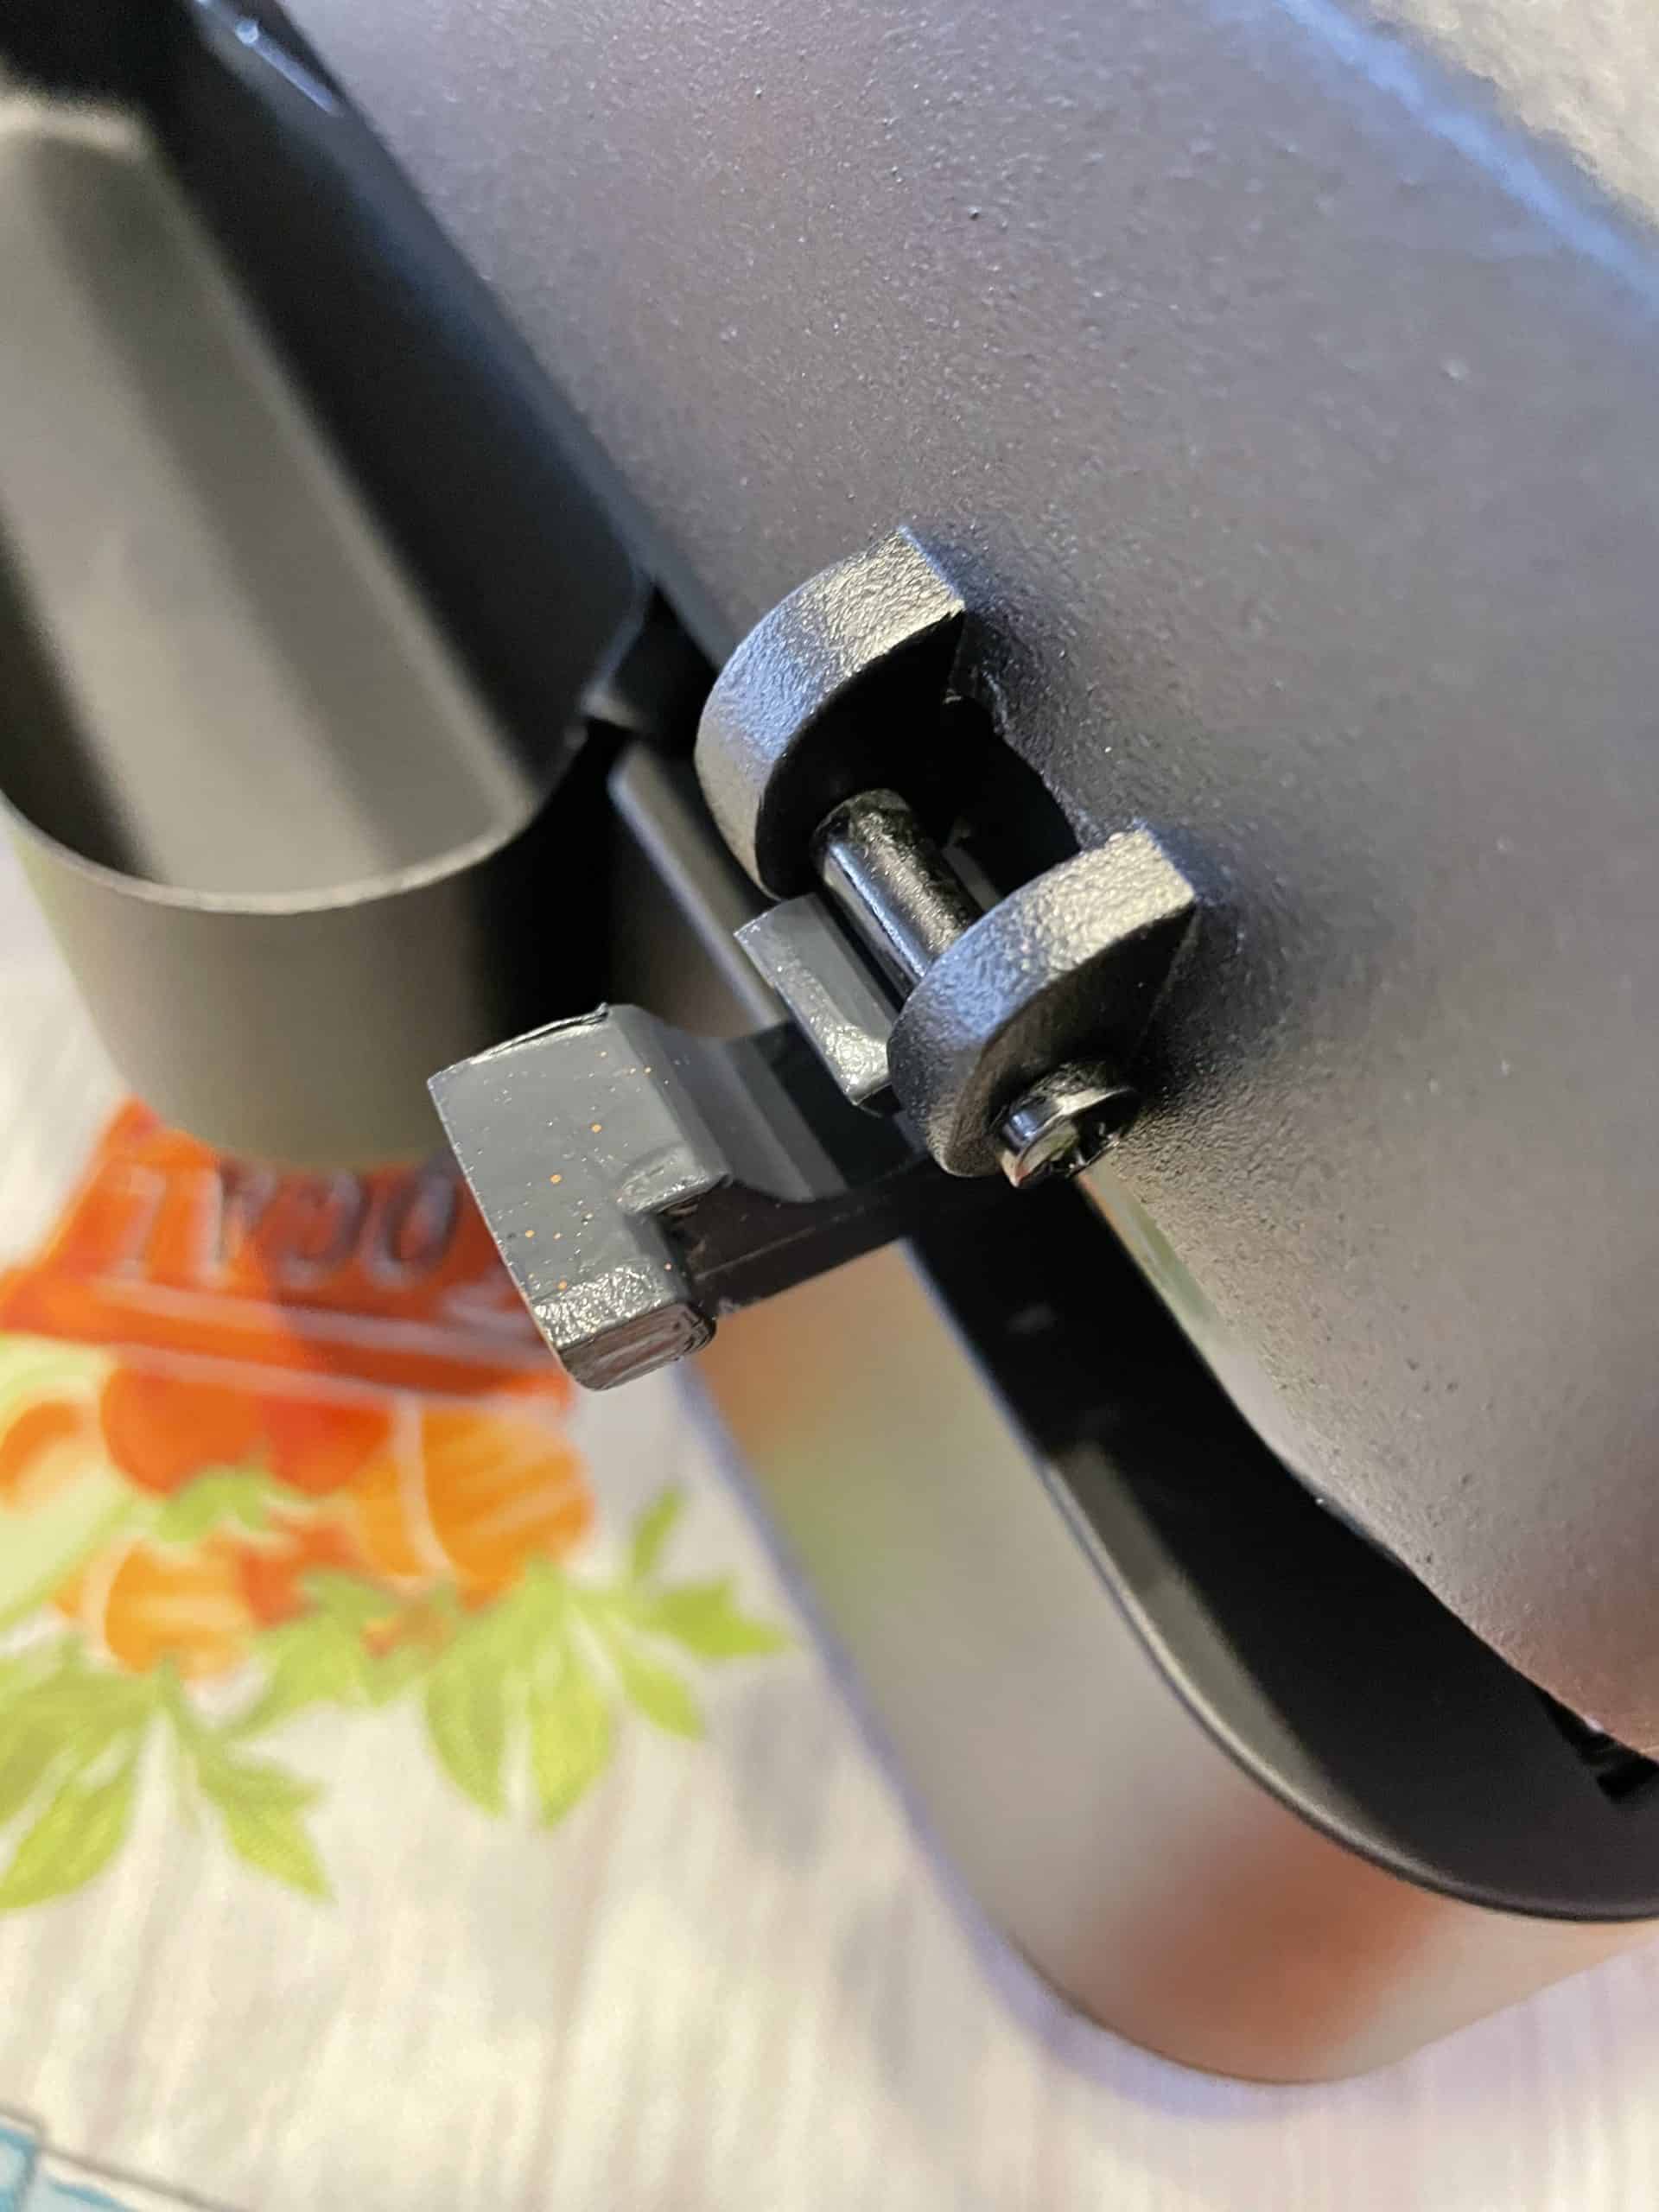 Attach the hood lid hinge into the base bracket of the tabletop grill electric.